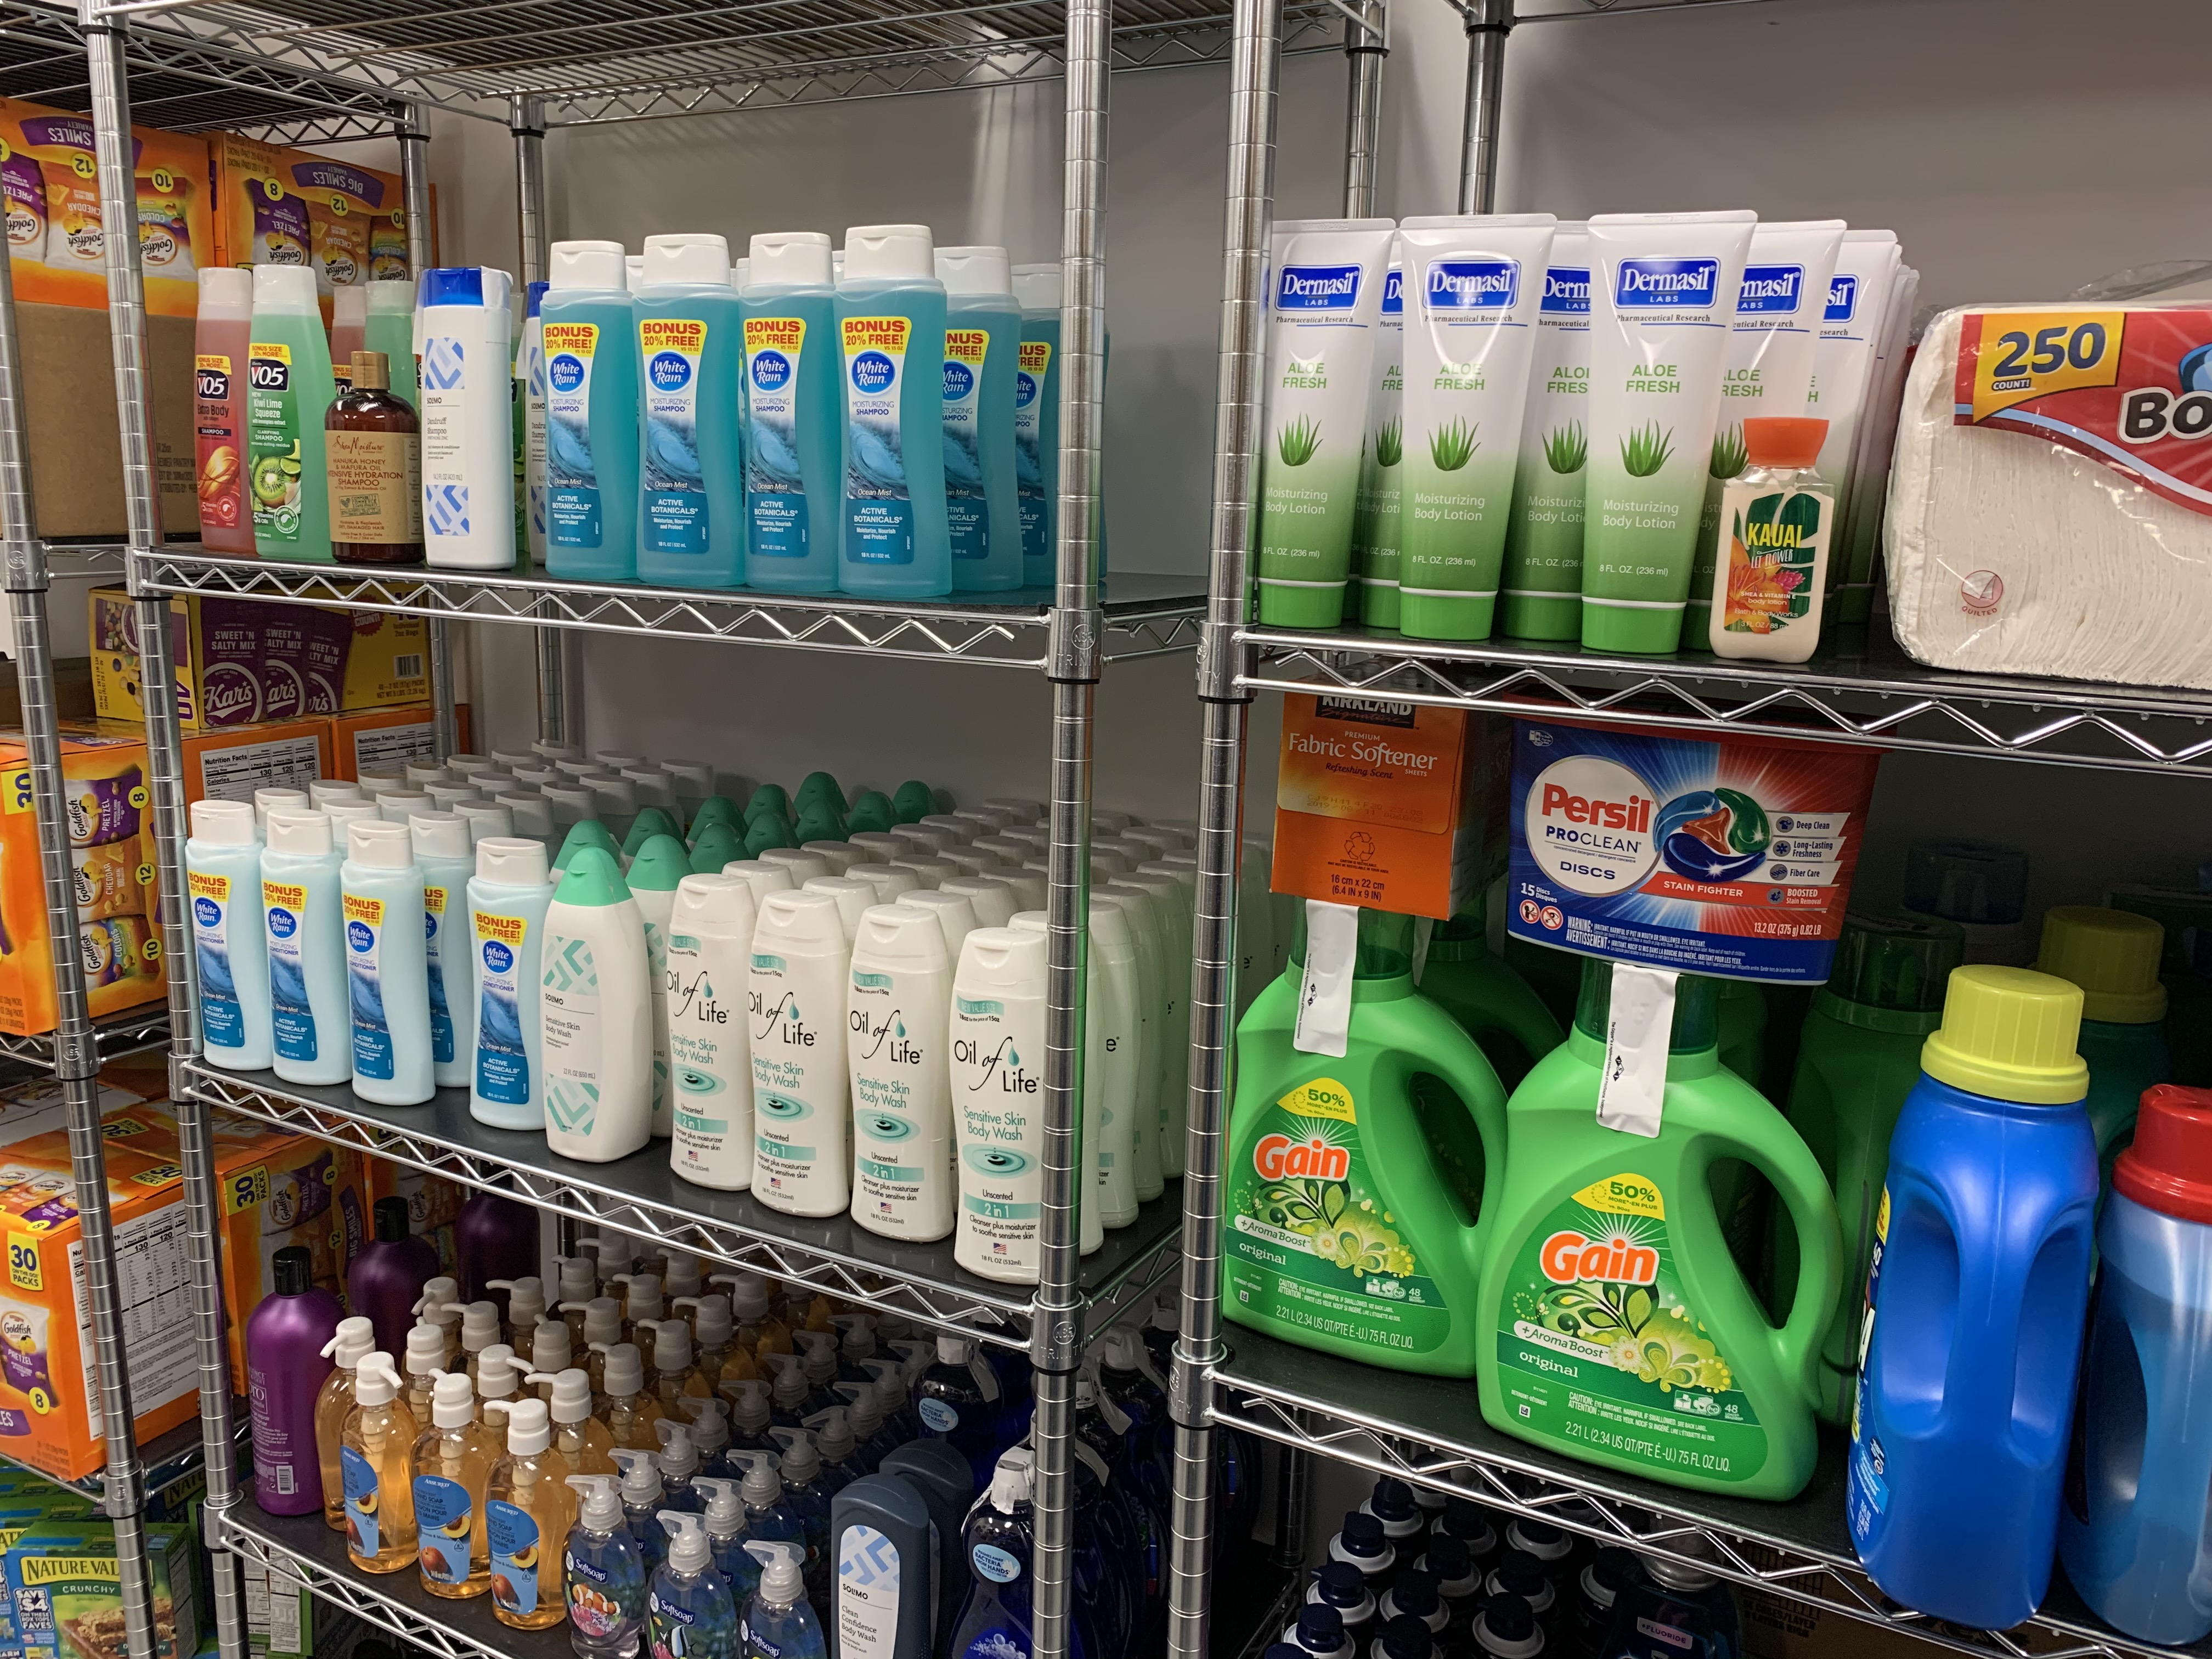 Donations of shampoo, hair conditioner, body wash, and bar soap are currently needed at Husker Pantry.  